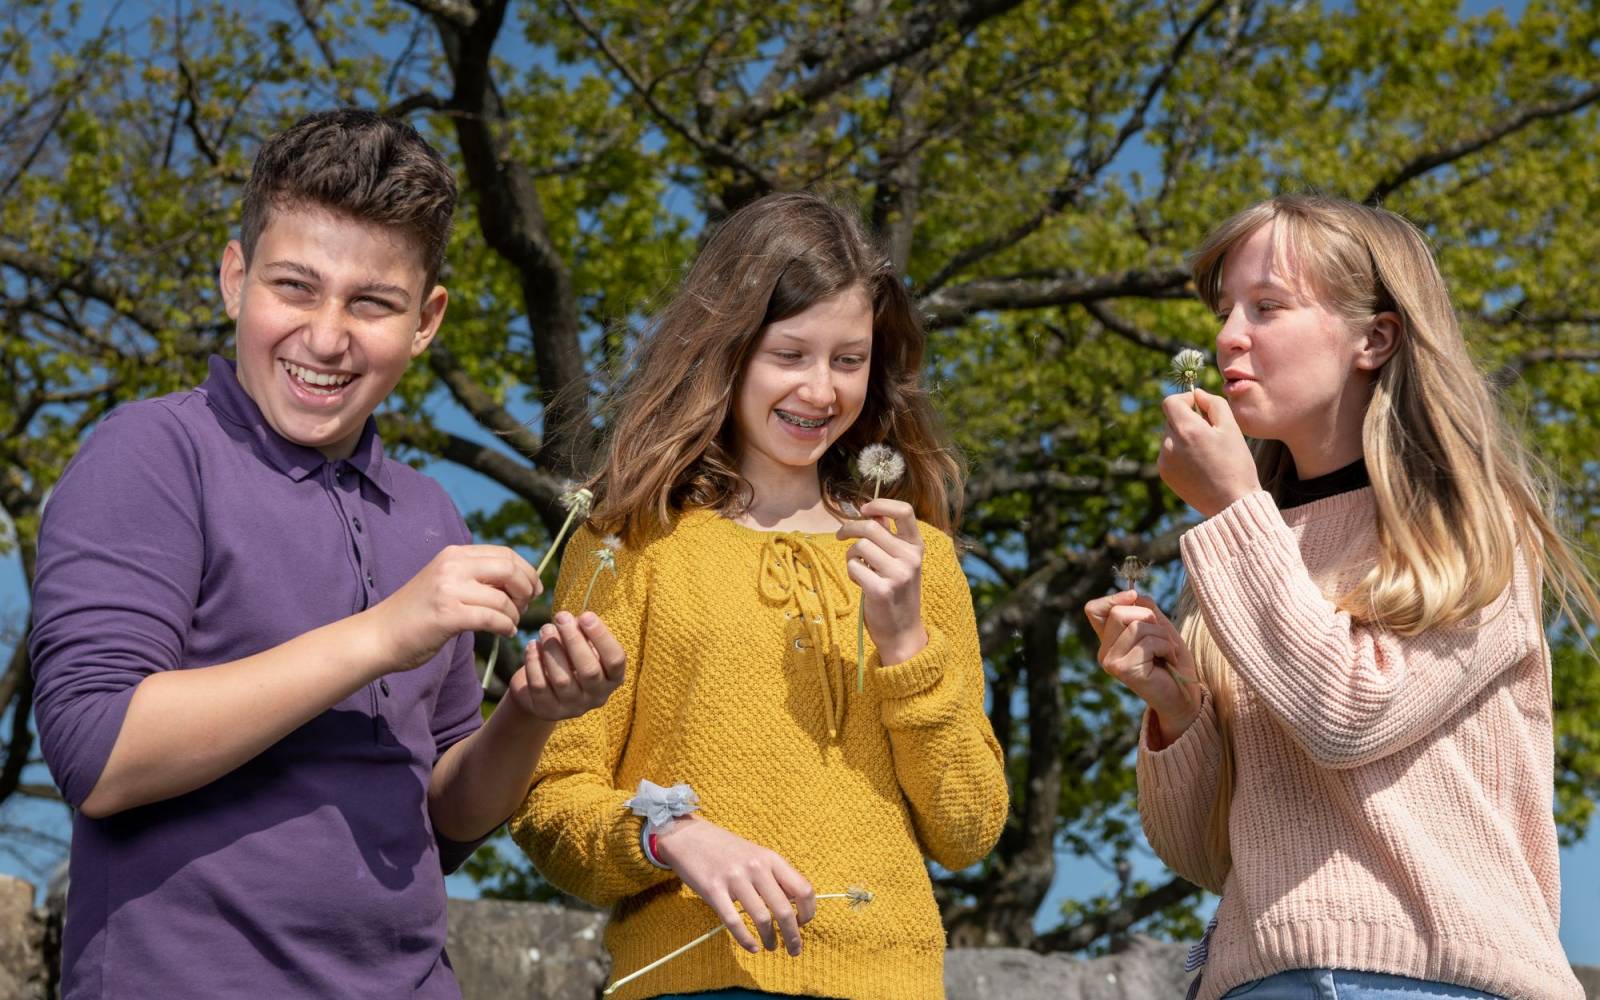 Three teenagers in nature laughing and blowing dandelions